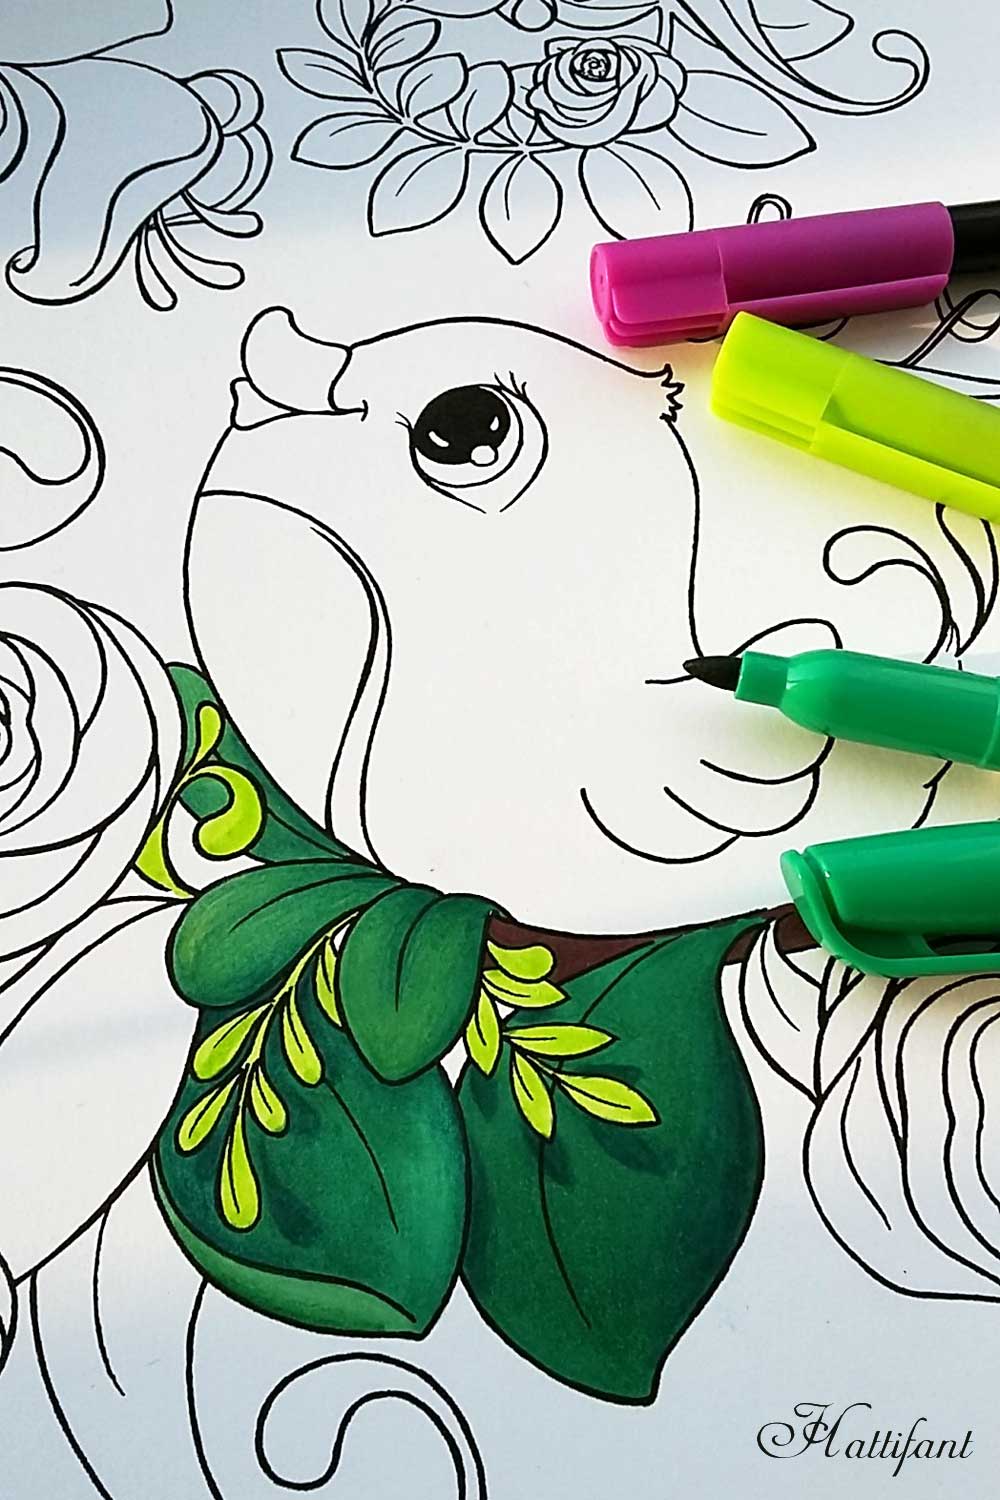 Hattifant's FREE Bird and Flowers Coloring Page